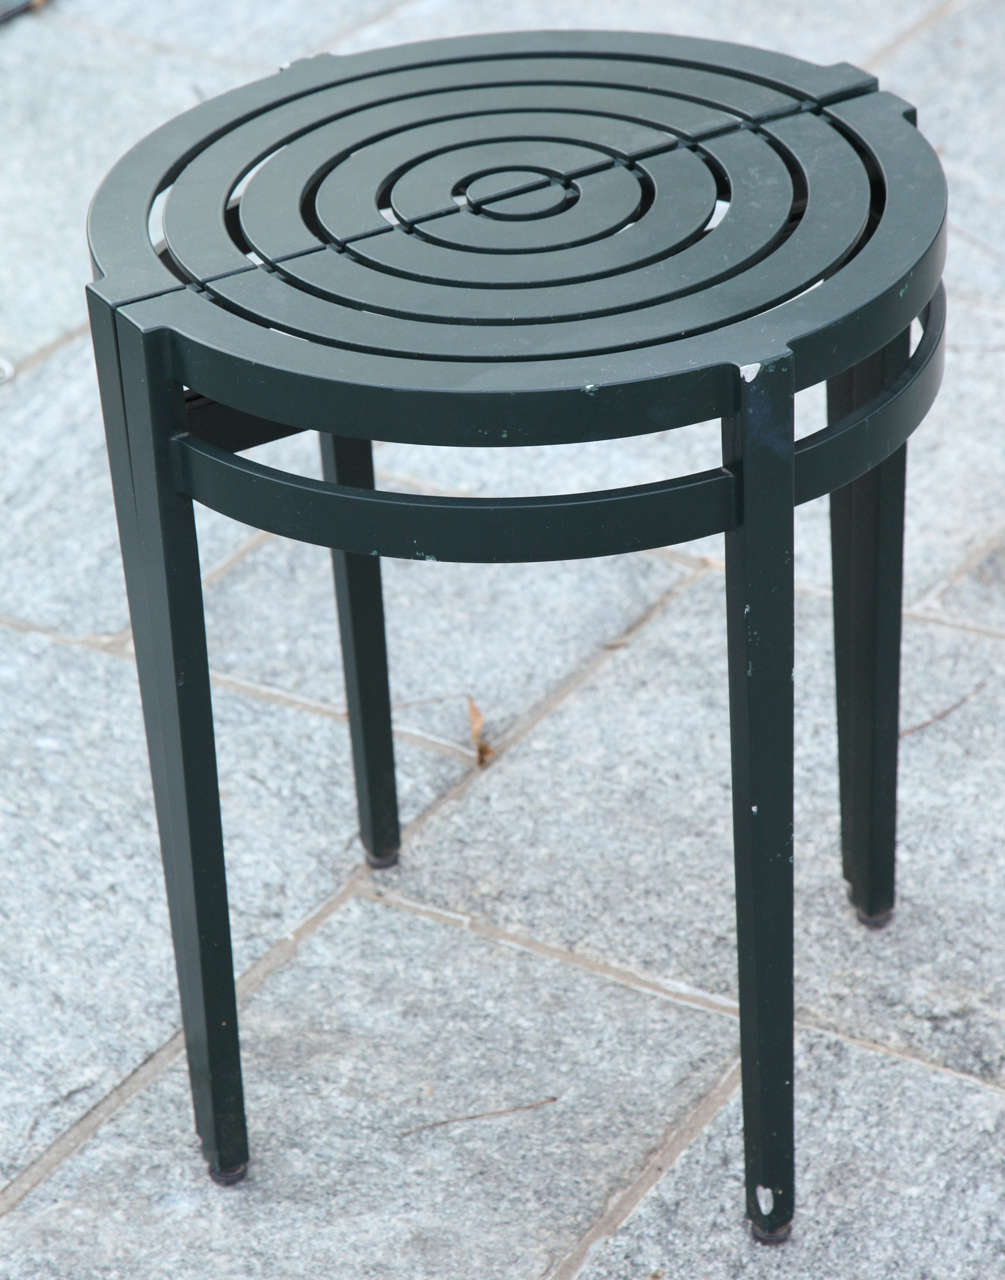 Can be used together to form a circular side table or apart.  Two pairs available.  Handcrafted in dark green powder-coated aluminum by McKinnon and Harris of Virginia.